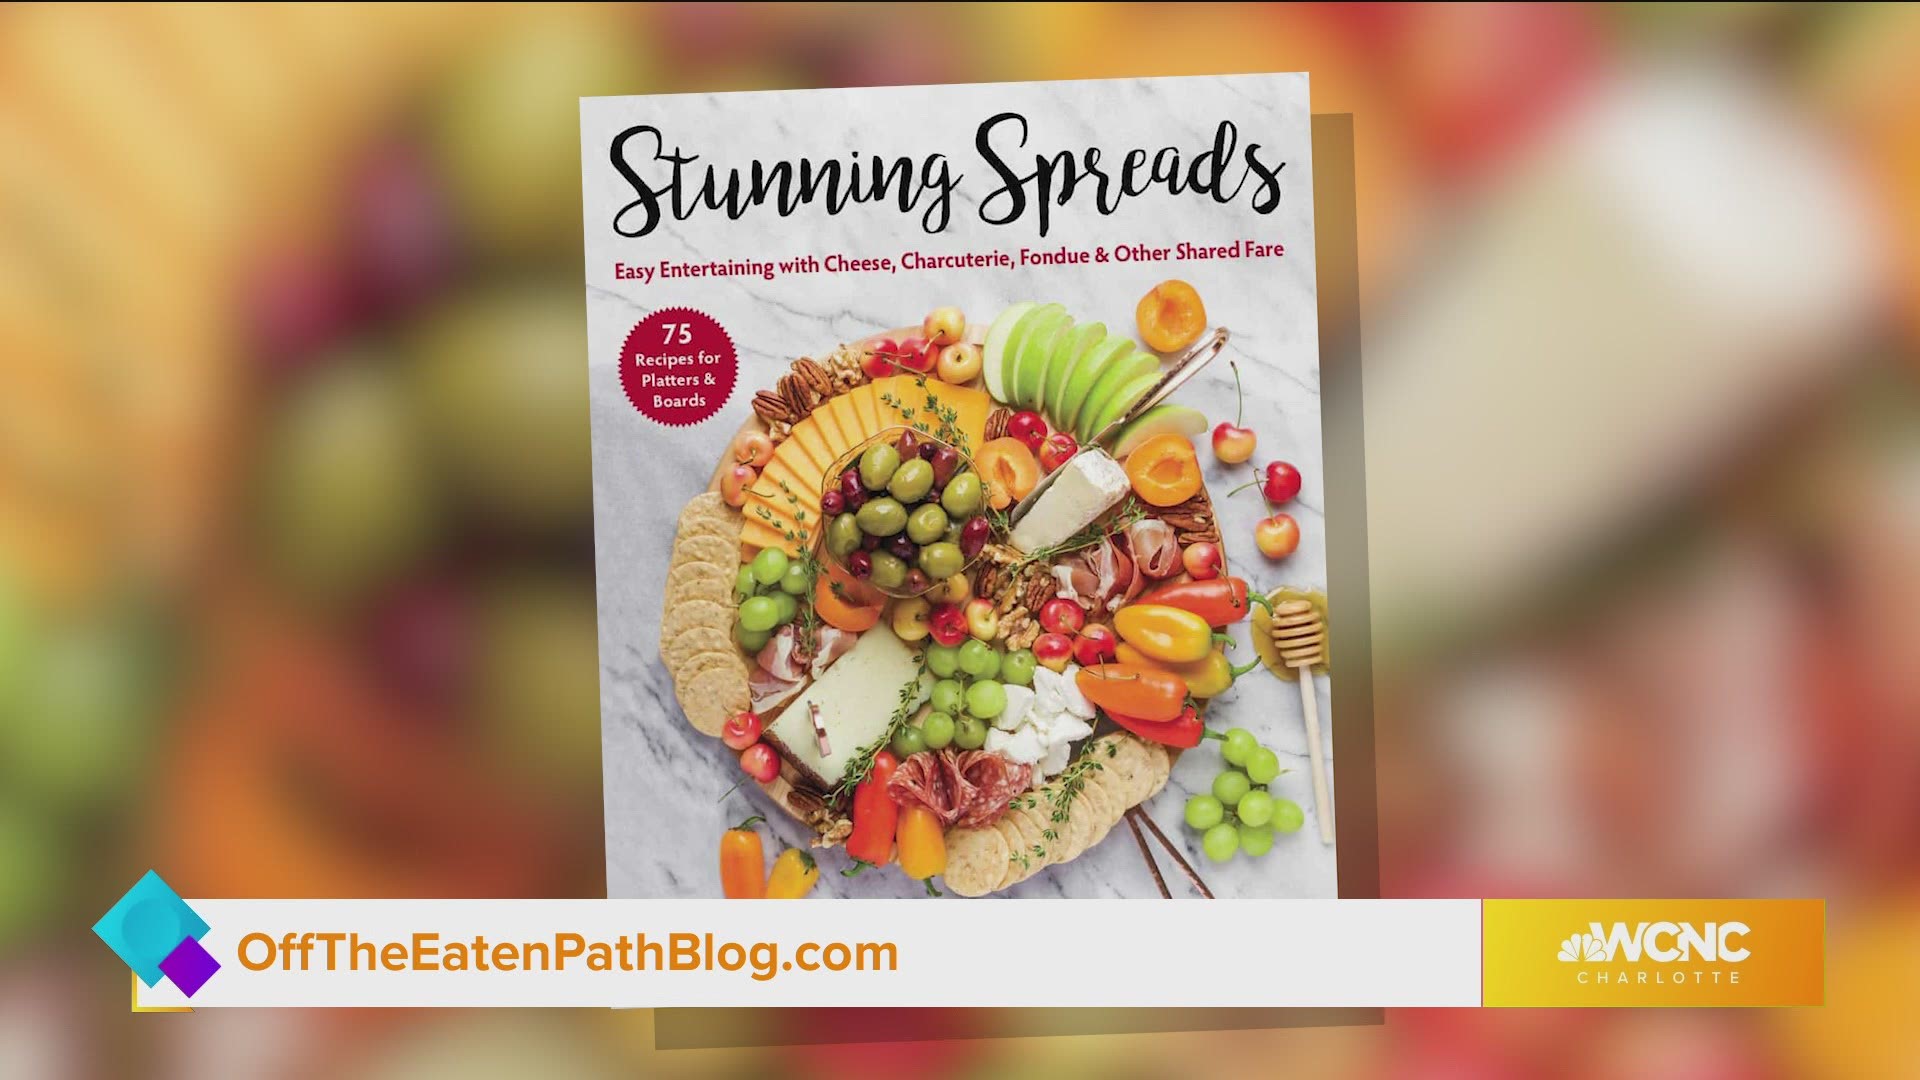 New cookbook shares recipes for charcuterie, fondue and appetizers